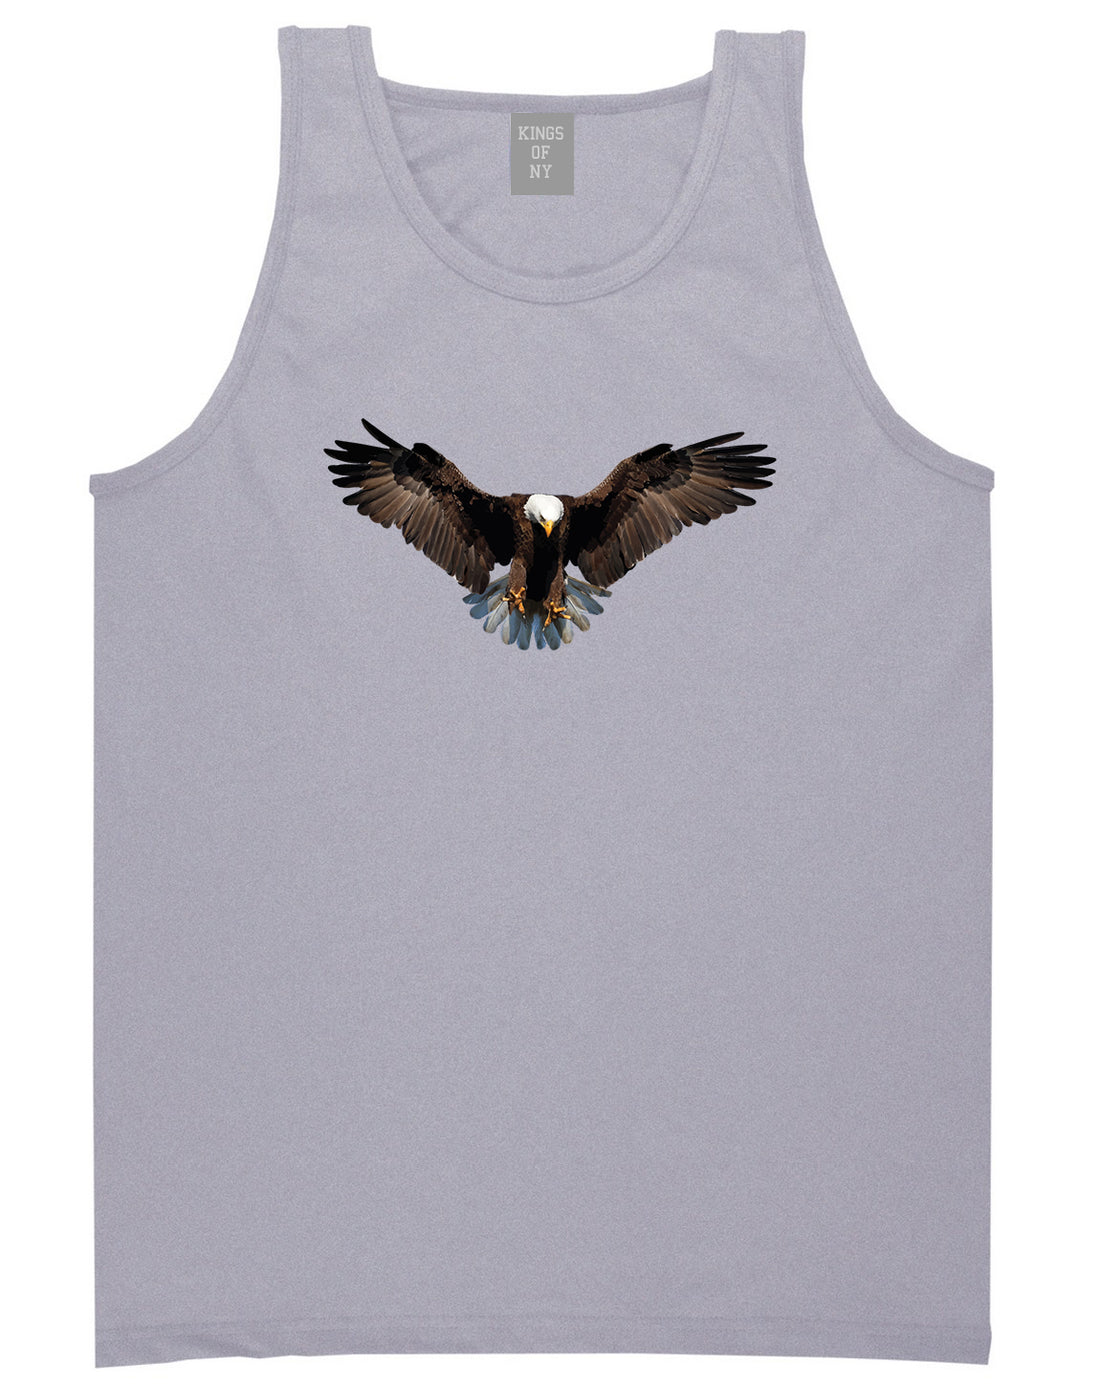 Bald Eagle Wings Spread Grey Tank Top Shirt by Kings Of NY